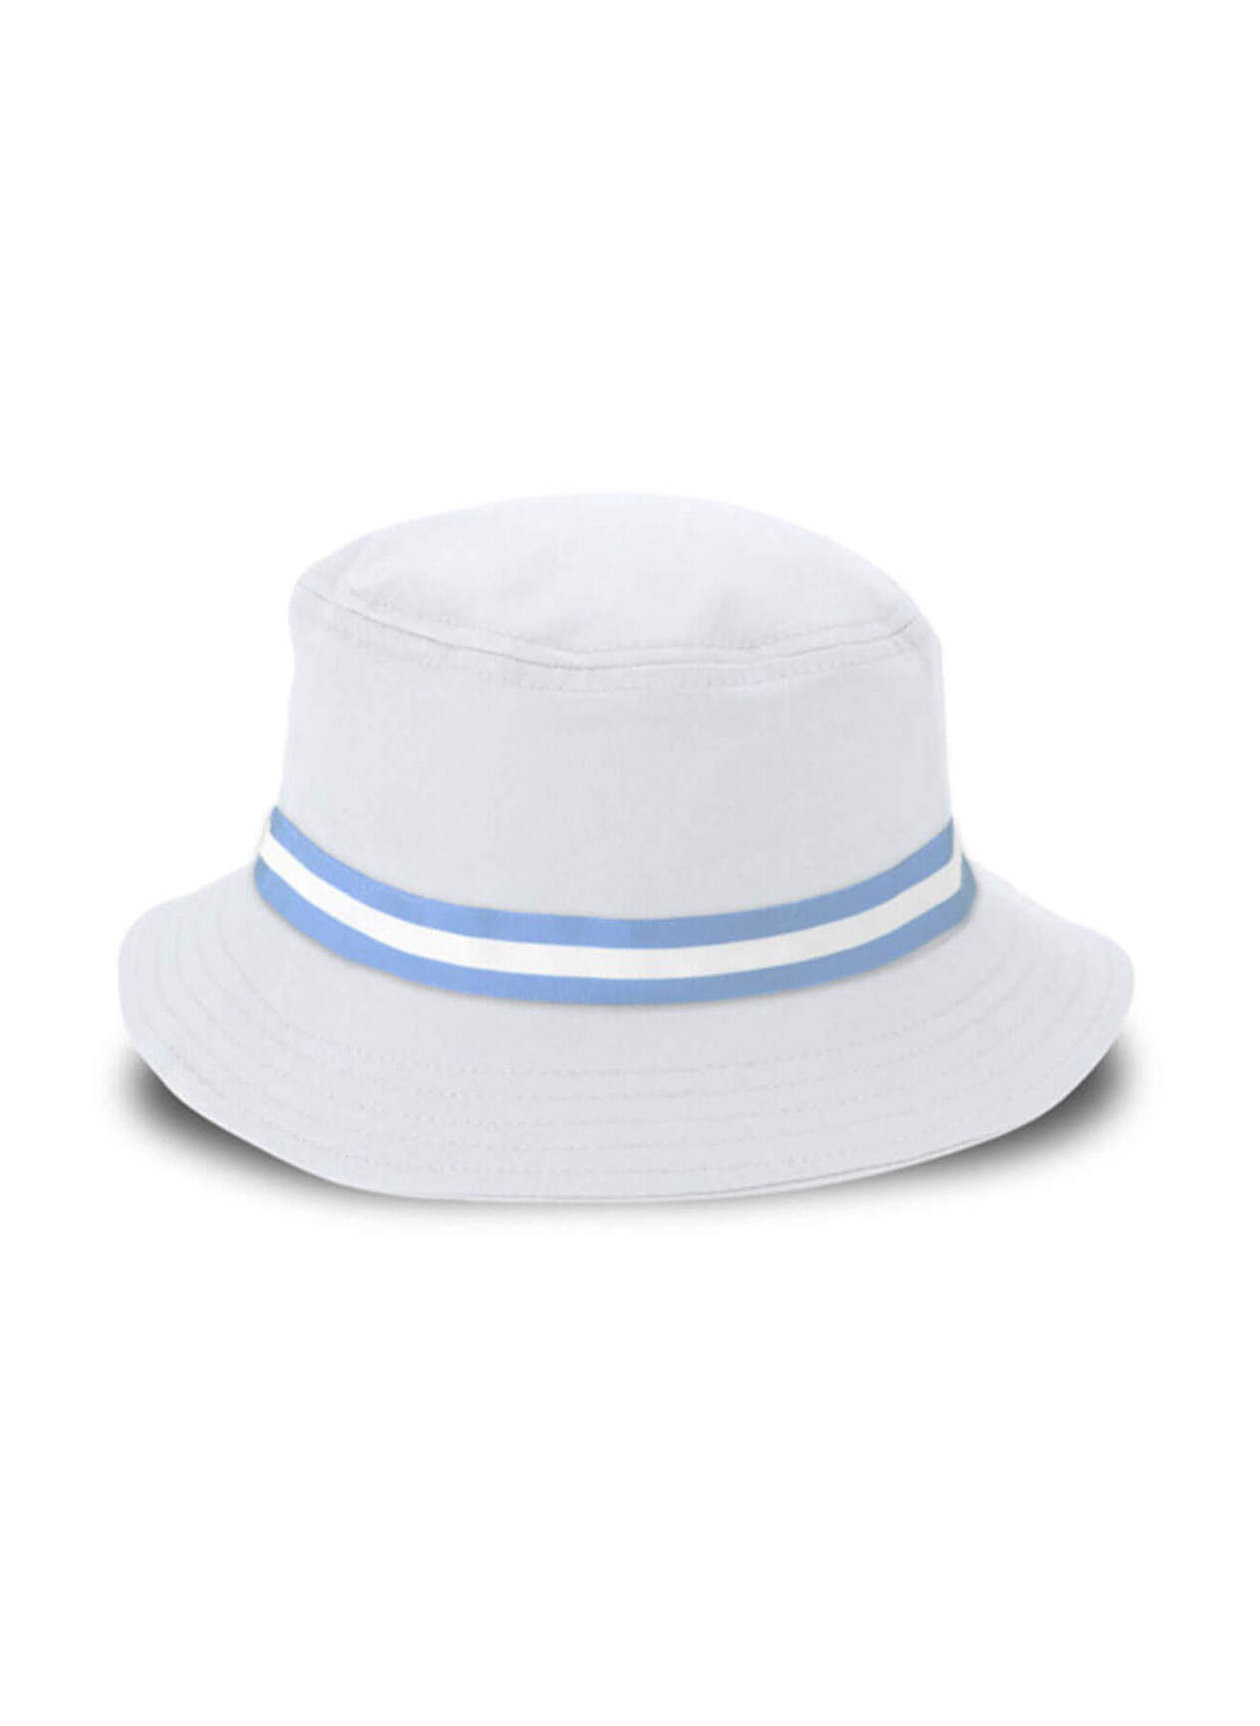 Imperial White / Light Blue The Oxford Bucket Hat